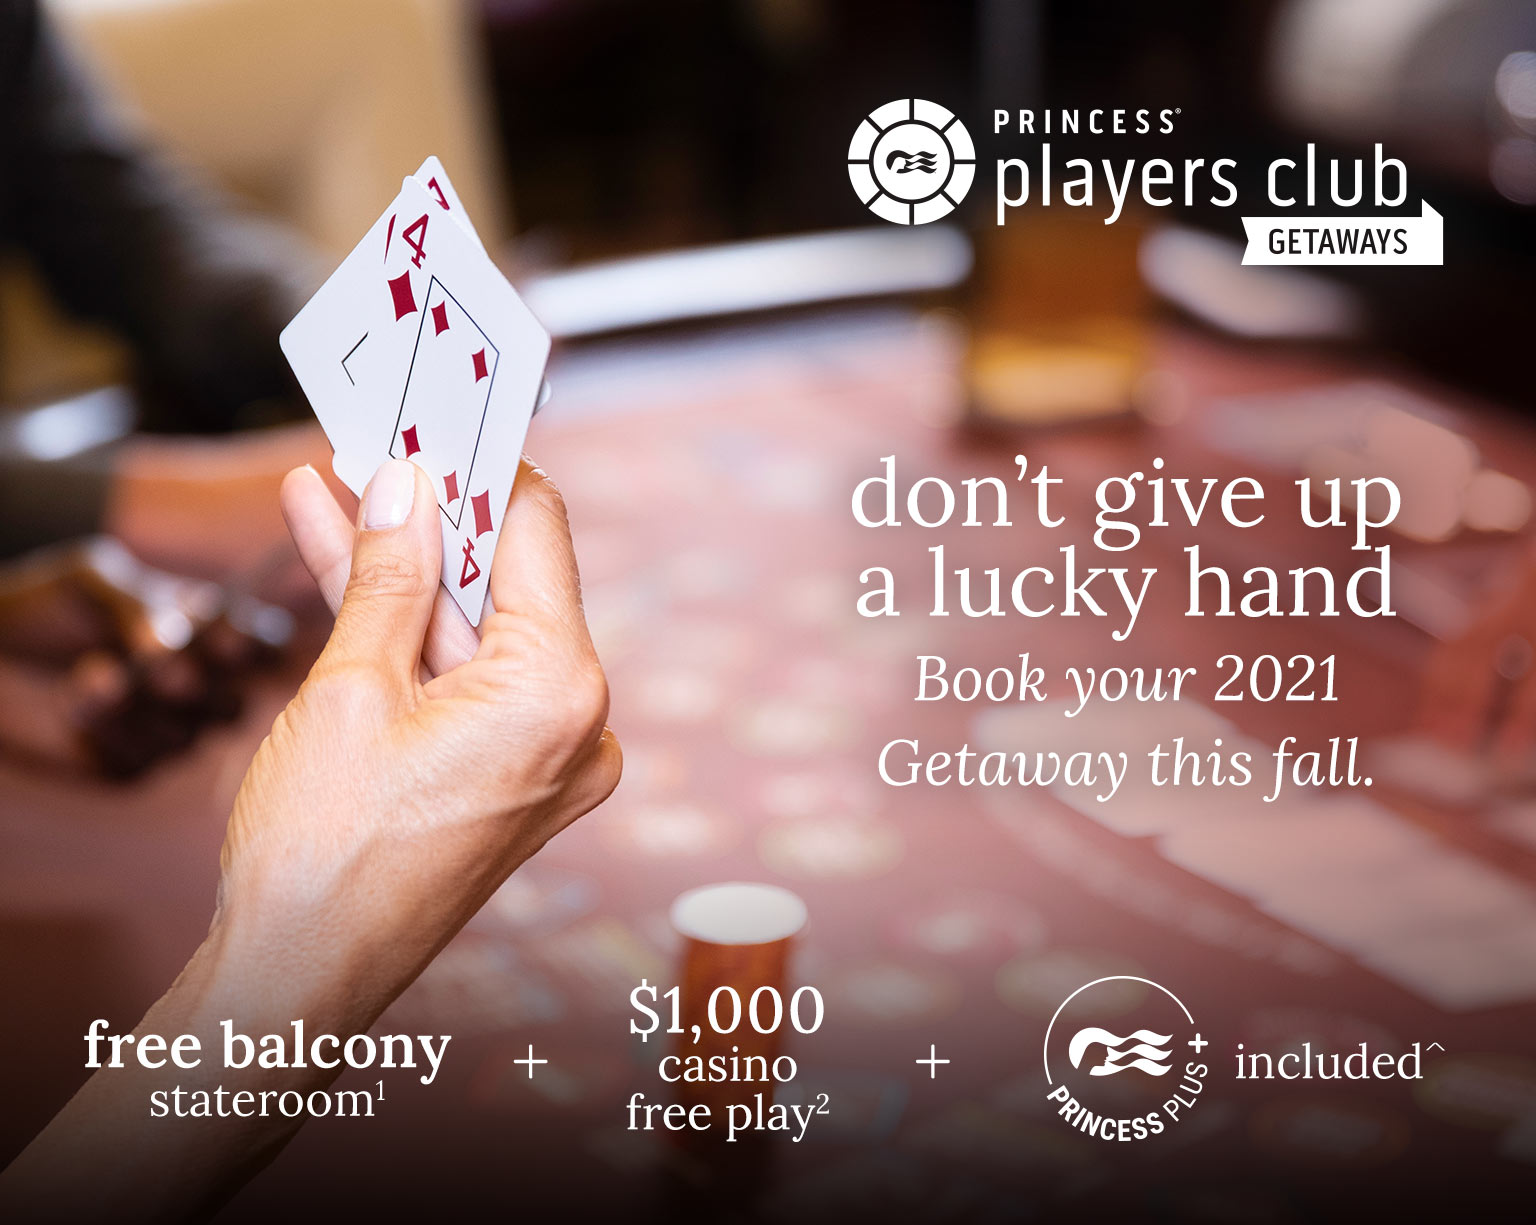 A man and a woman cheer at the slot machines - Princess Players Club Getaways - Don't give up a lucky hand, book your 2021 getaway! - free balcony stateroom + $1000 casino free play + princess plus+ included^